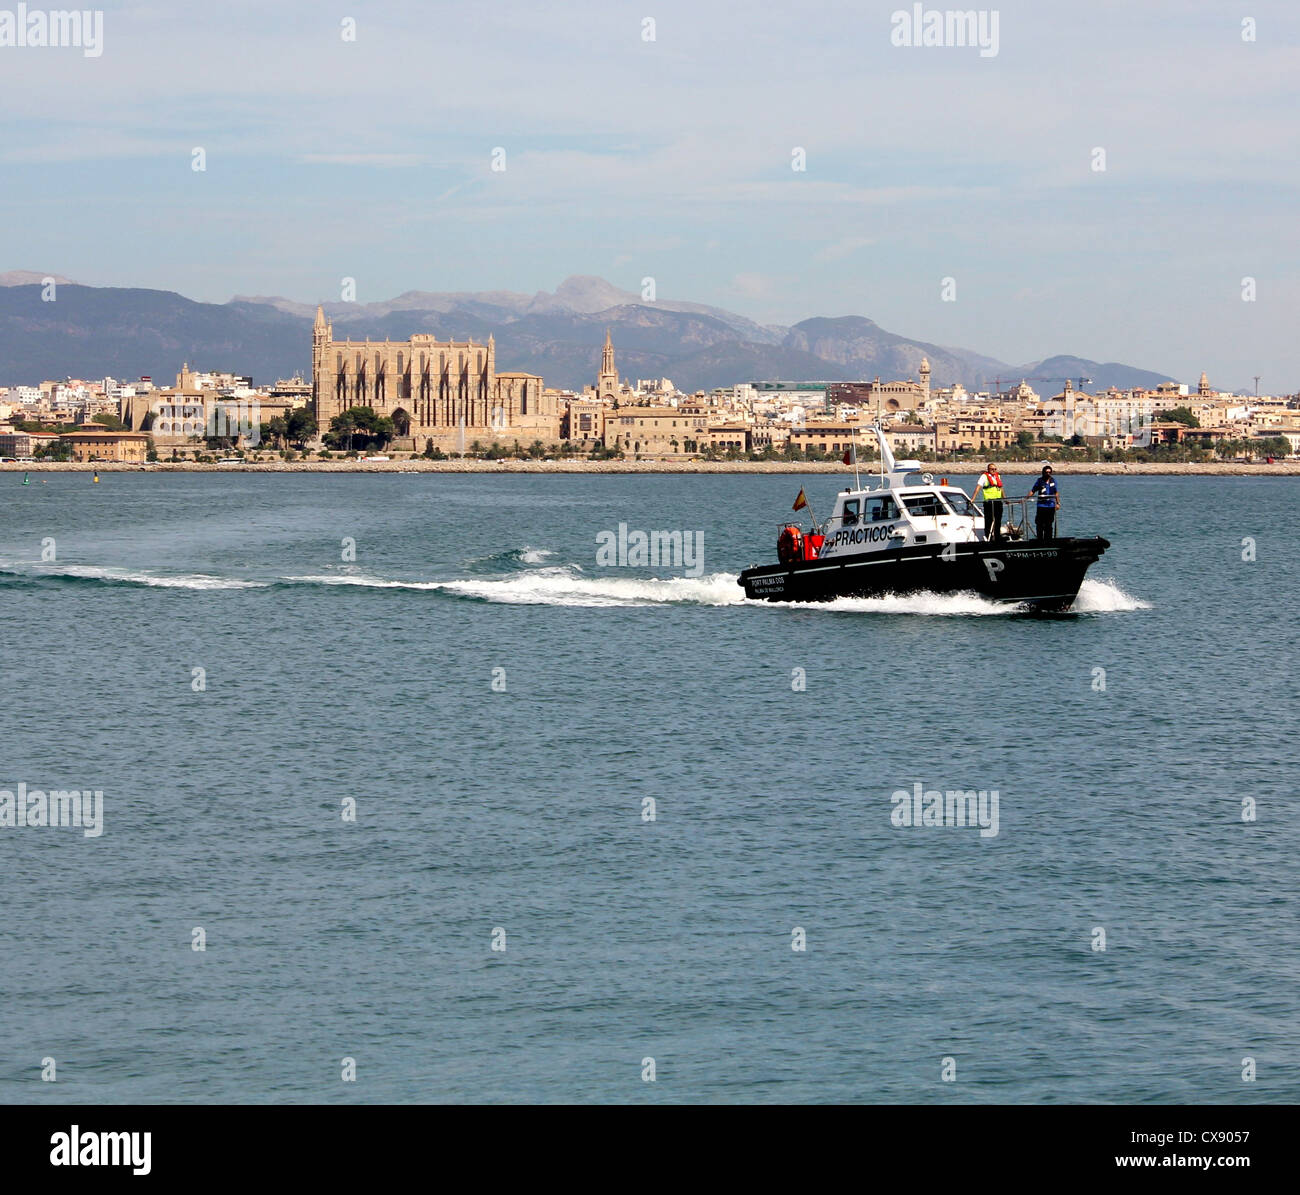 Practicos / Port Pilot launch with historic Palma Cathedral behind in the Port of Palma de Mallorca / Majorca, Balearic Isl;ands Stock Photo